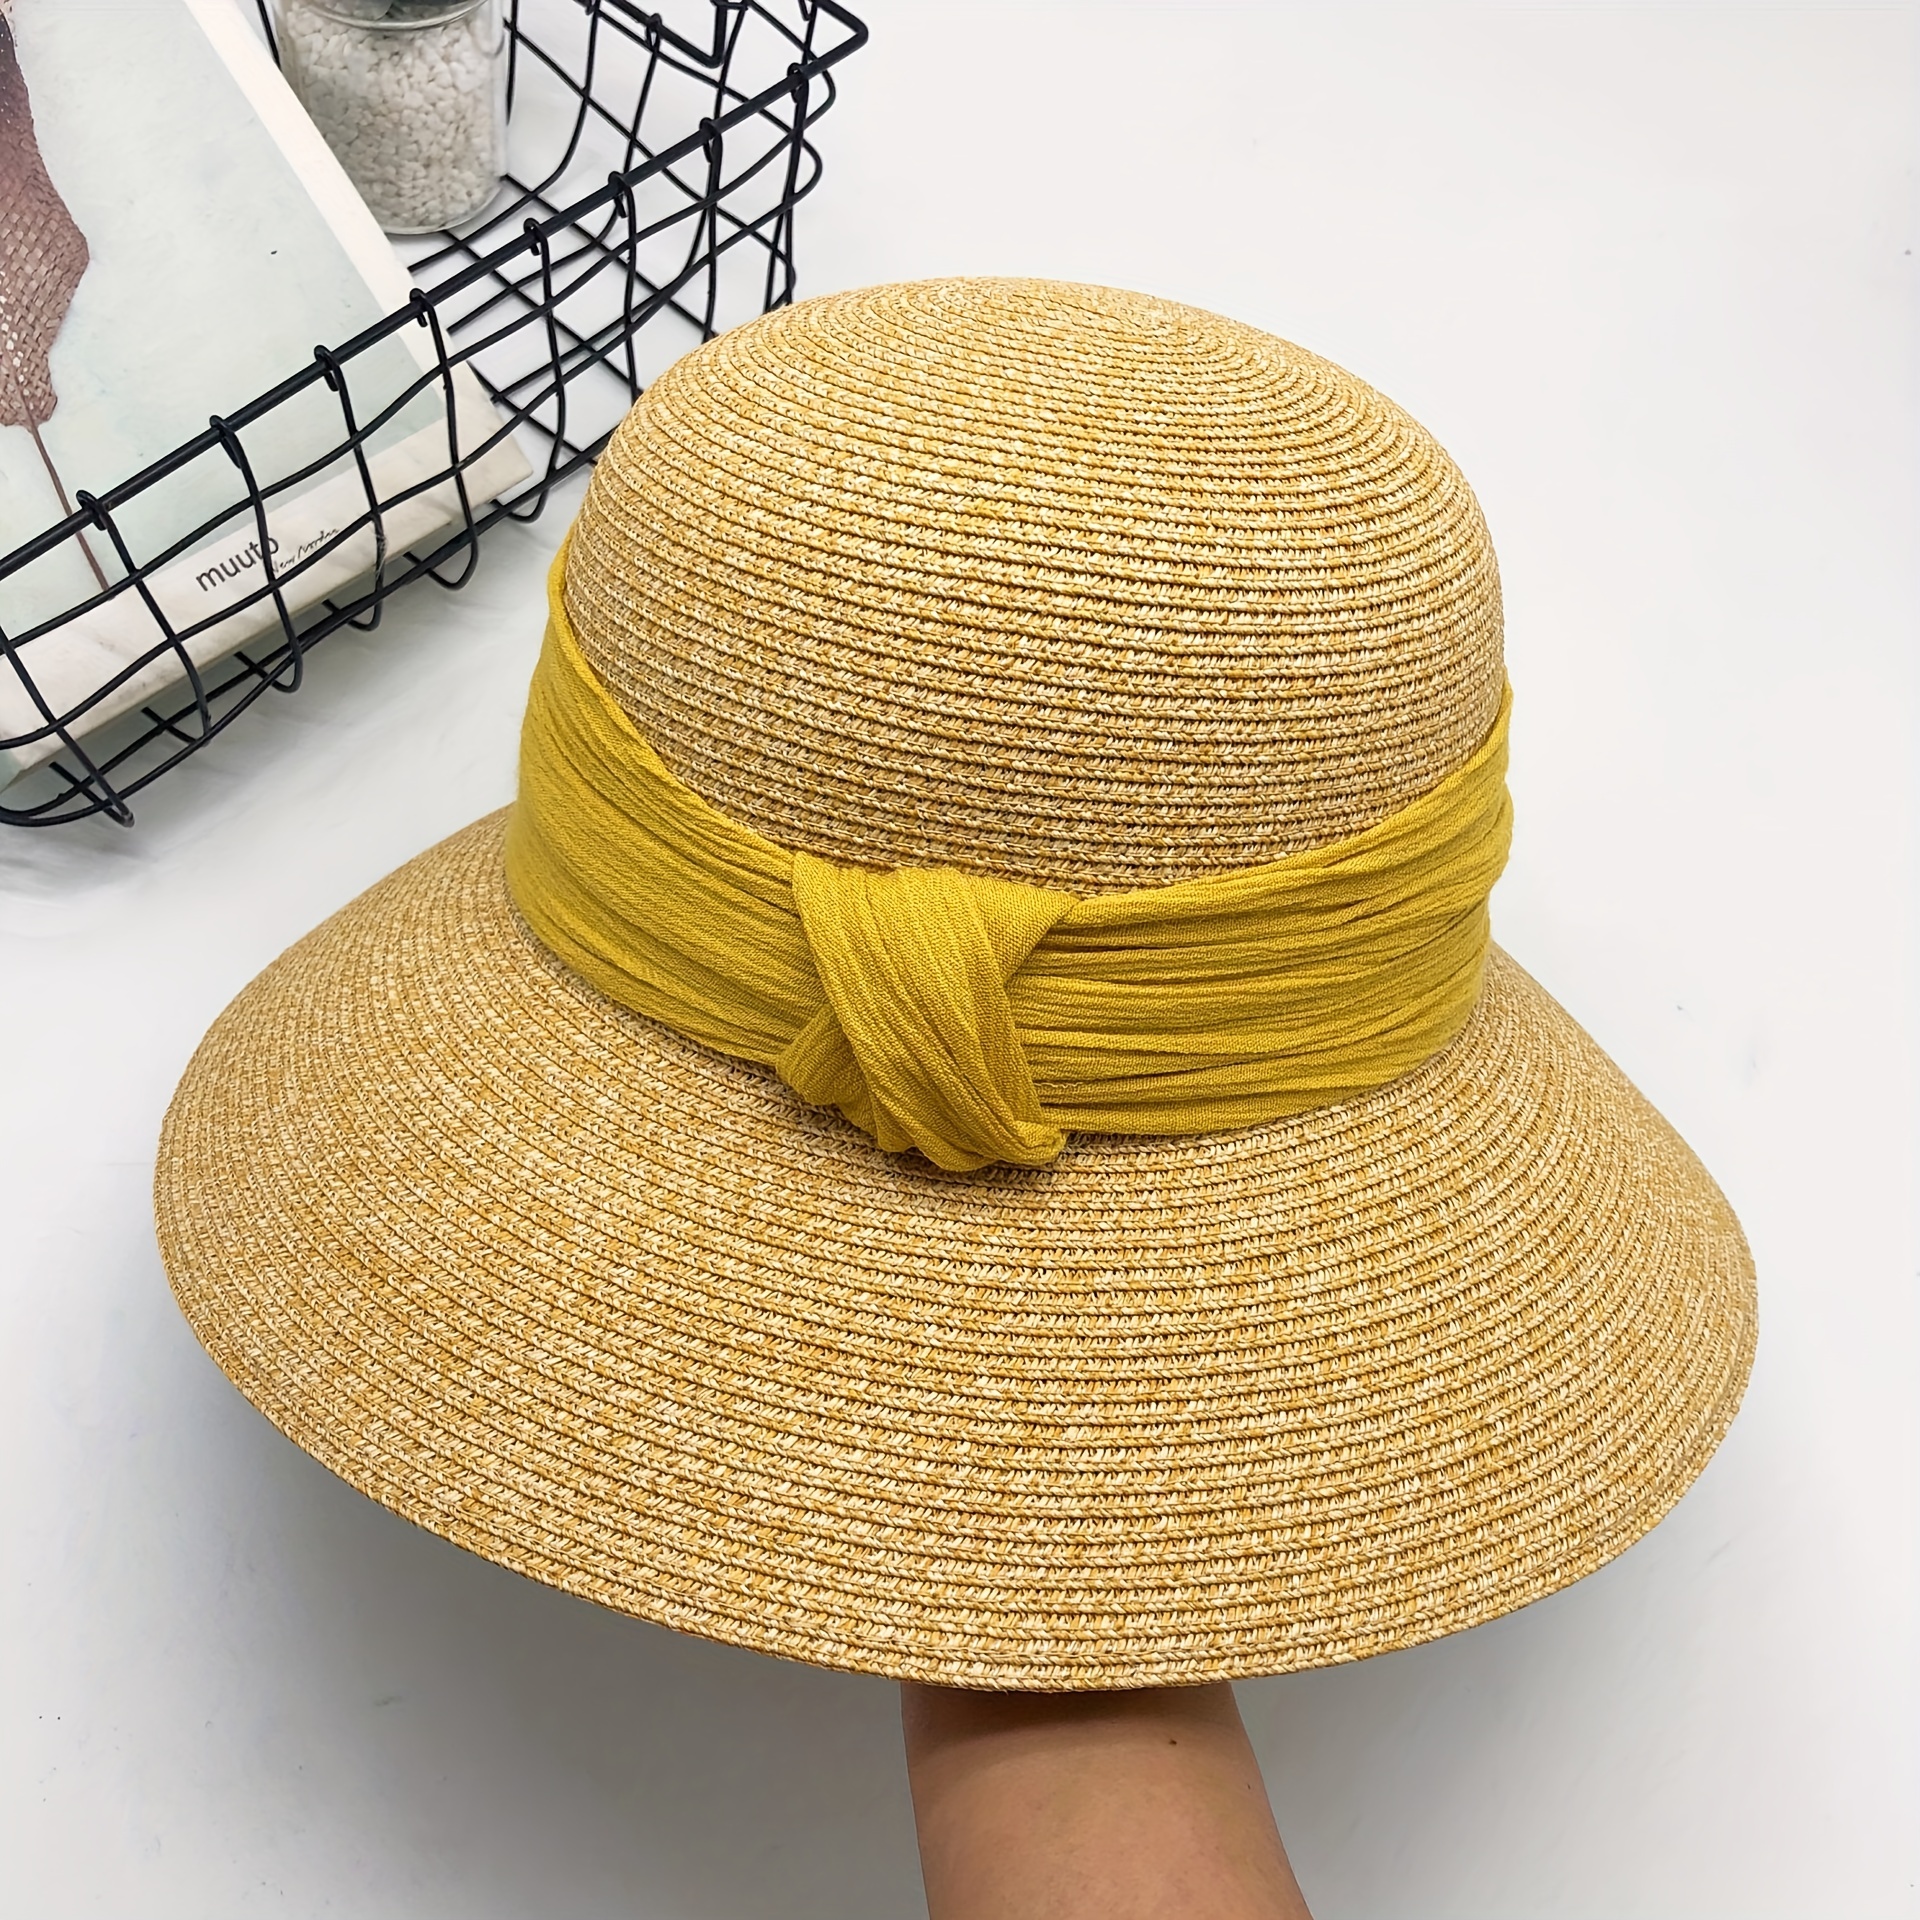 Women's Summer Sun Hat - Wide Brim for Trendy Style and Sun Protection on Vacation and Beach